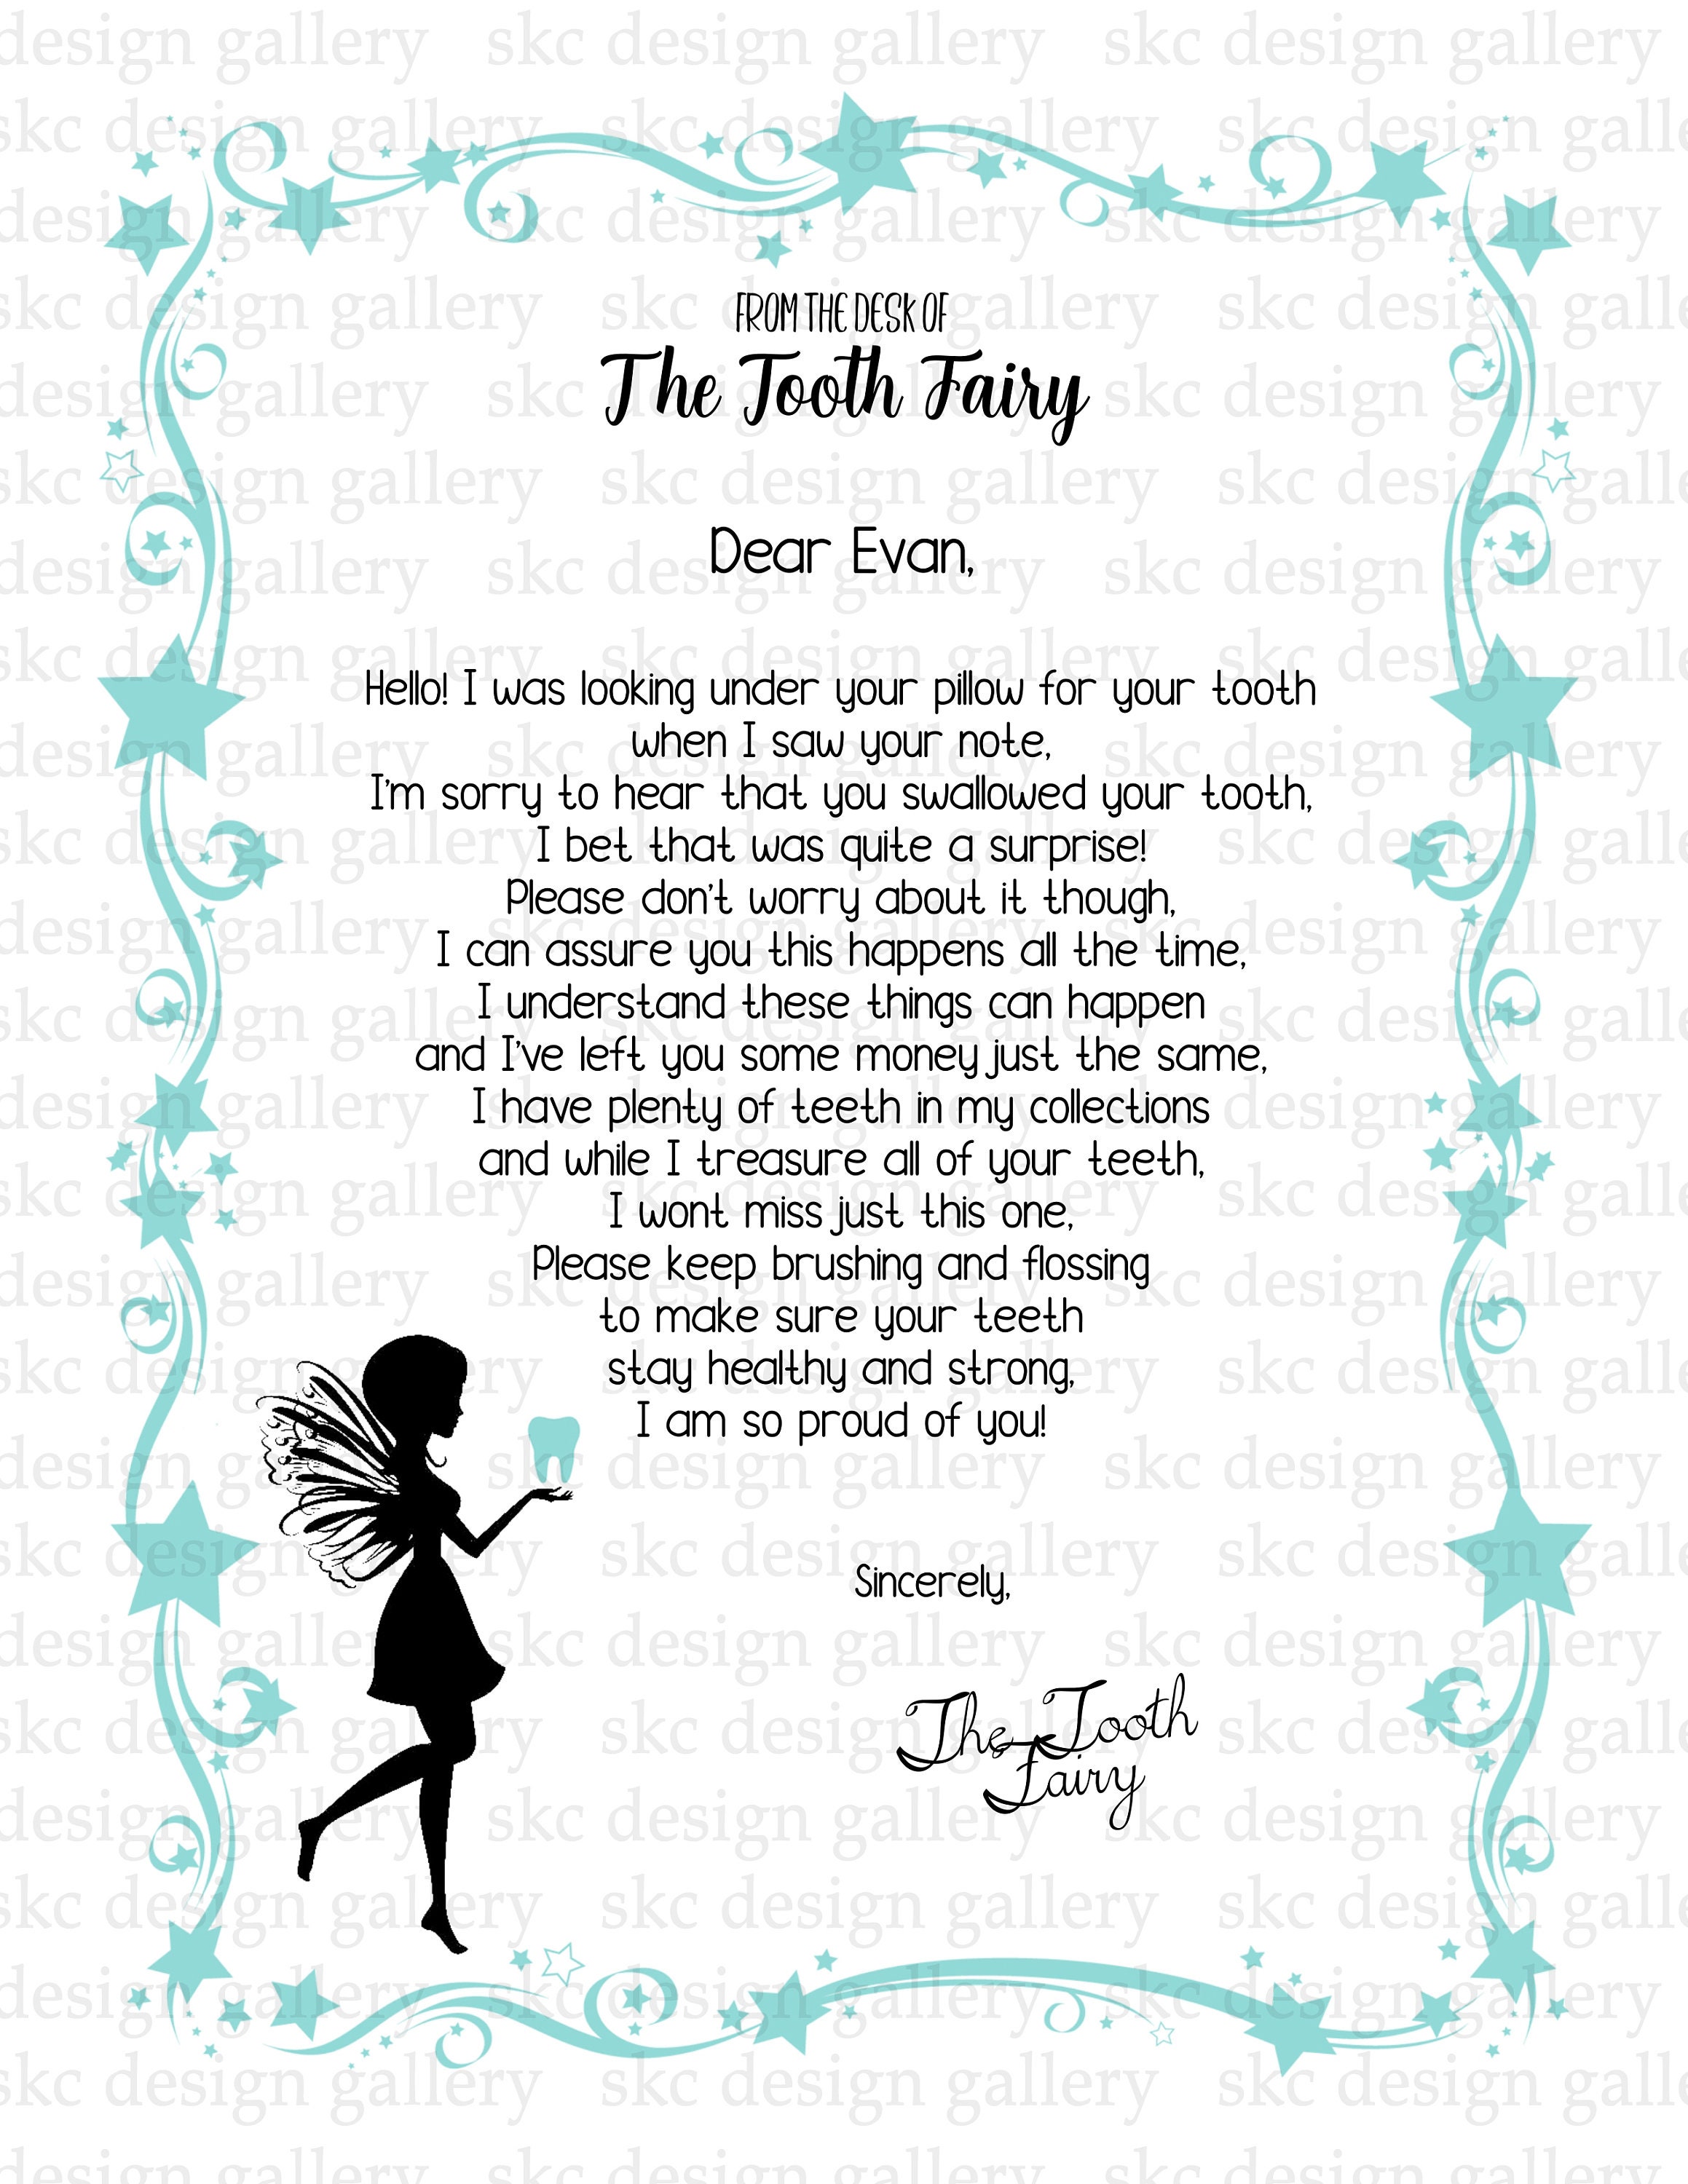 How To Write A Letter To The Tooth Fairy